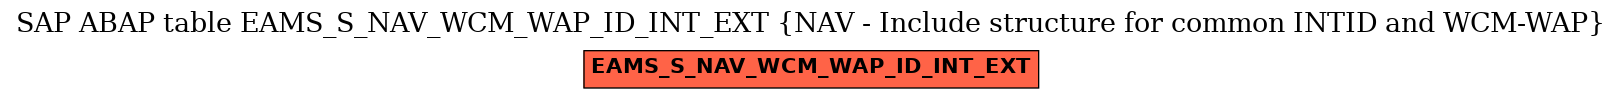 E-R Diagram for table EAMS_S_NAV_WCM_WAP_ID_INT_EXT (NAV - Include structure for common INTID and WCM-WAP)